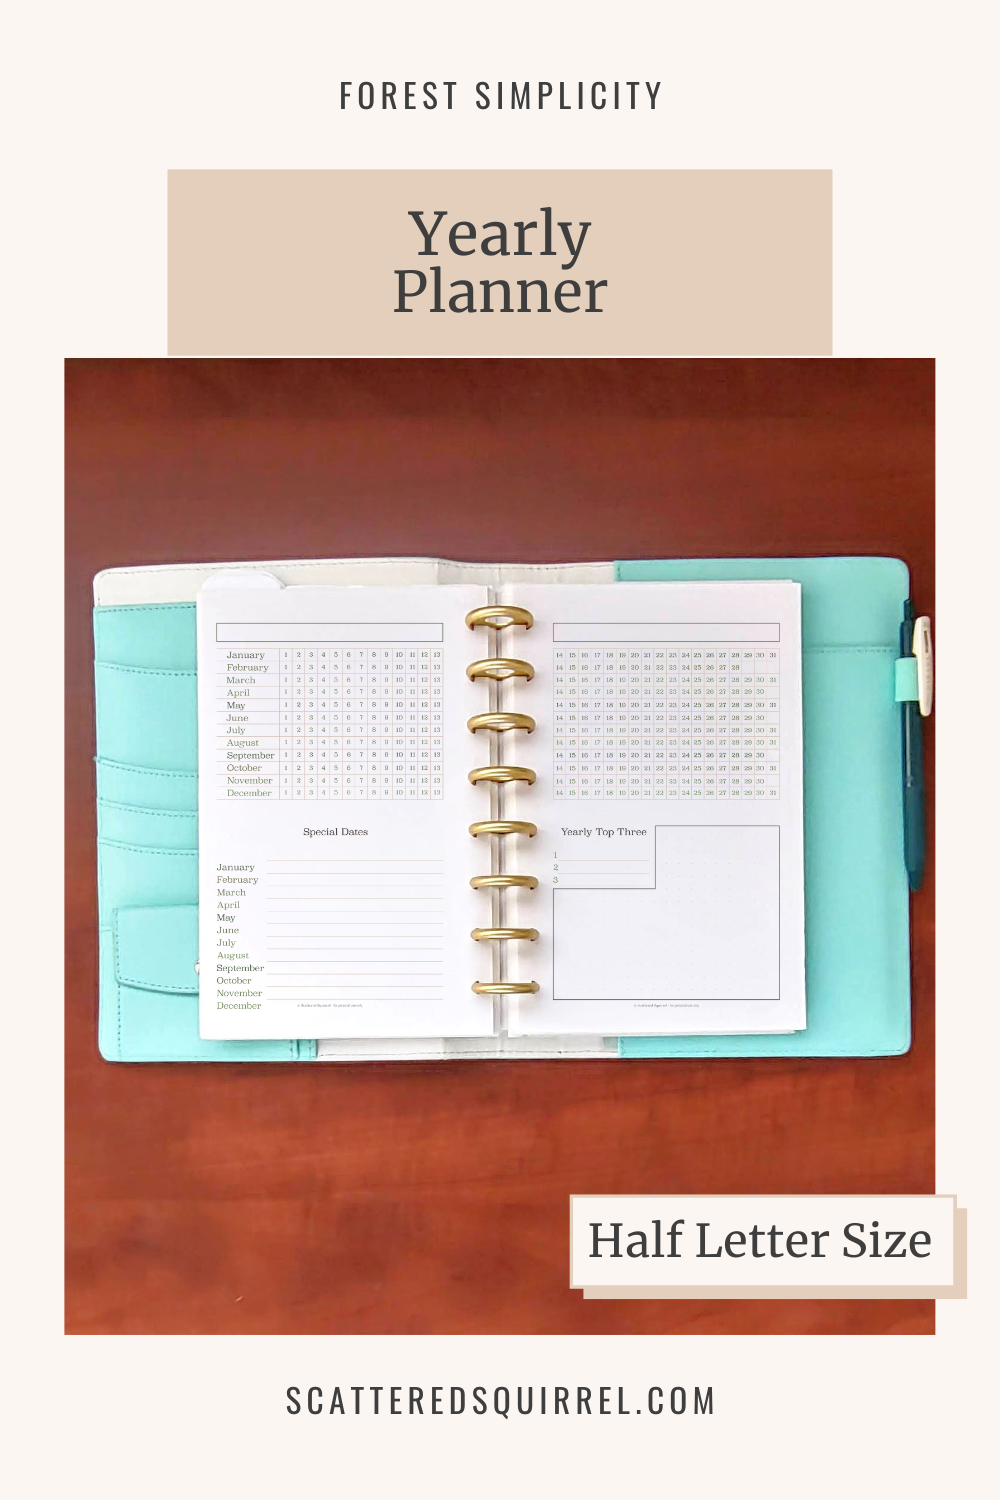 Image says "Forest Simplicity - Yearly Planner" at the top. Underneath is a picture of a white and teal leather planner lying open on a wooden desk. The pages show dated grid with each month being one row. Under that is room for recording special dates, setting priorities for the year and making notes . This image links to the Half Letter Size Yearly Planner PDF that can be downloaded.